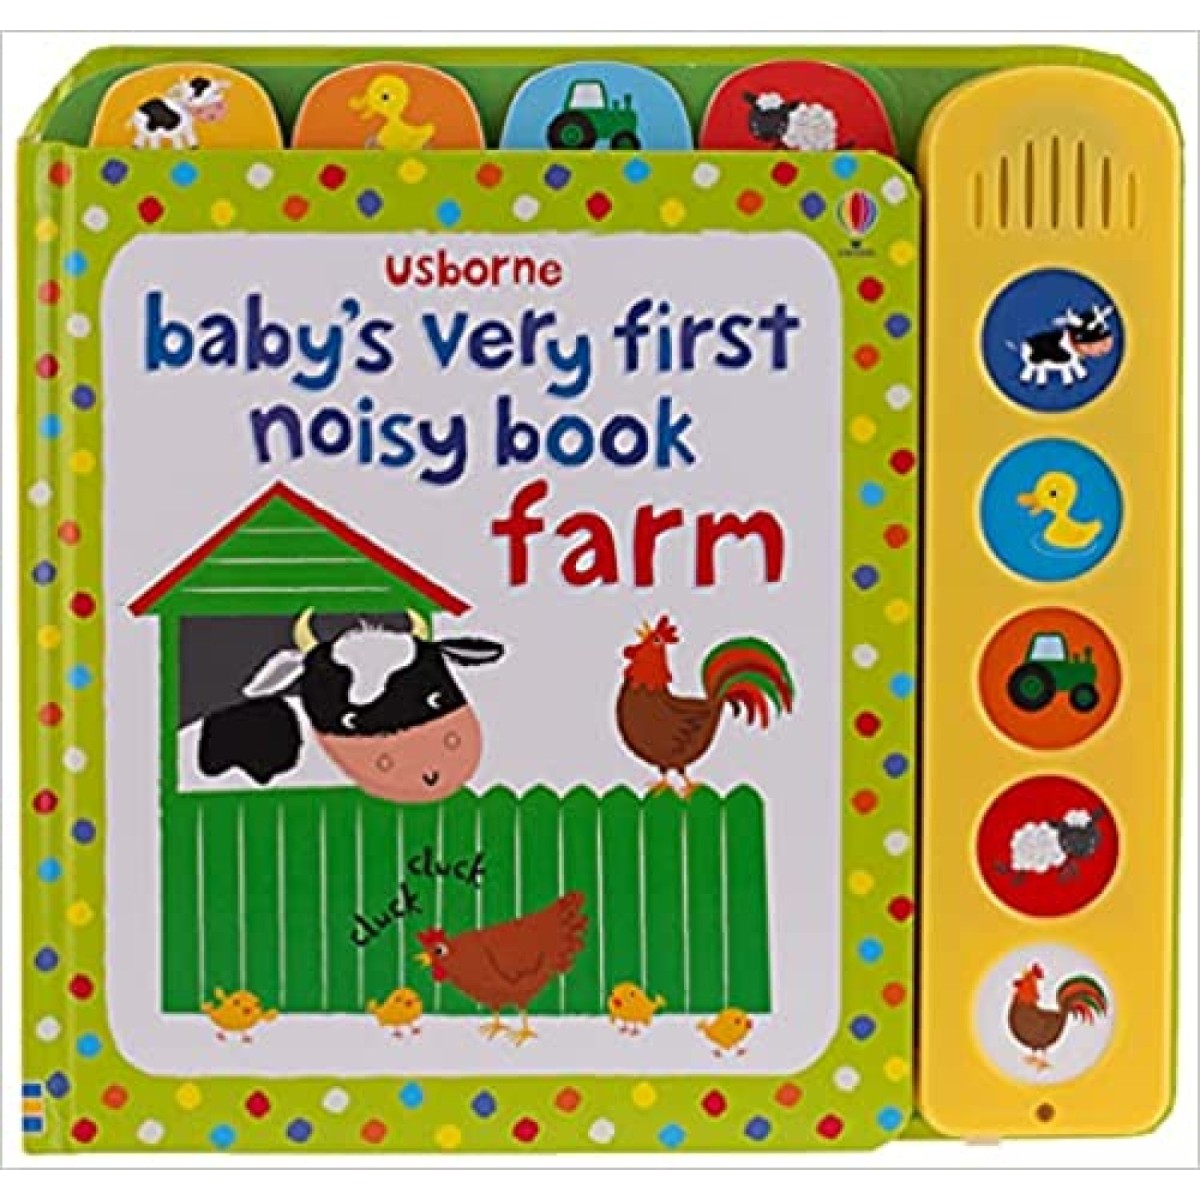 Treasures　FARM　FIRST　BOOK　NOISY　VERY　Of　Wetherby　BABY'S　Toys